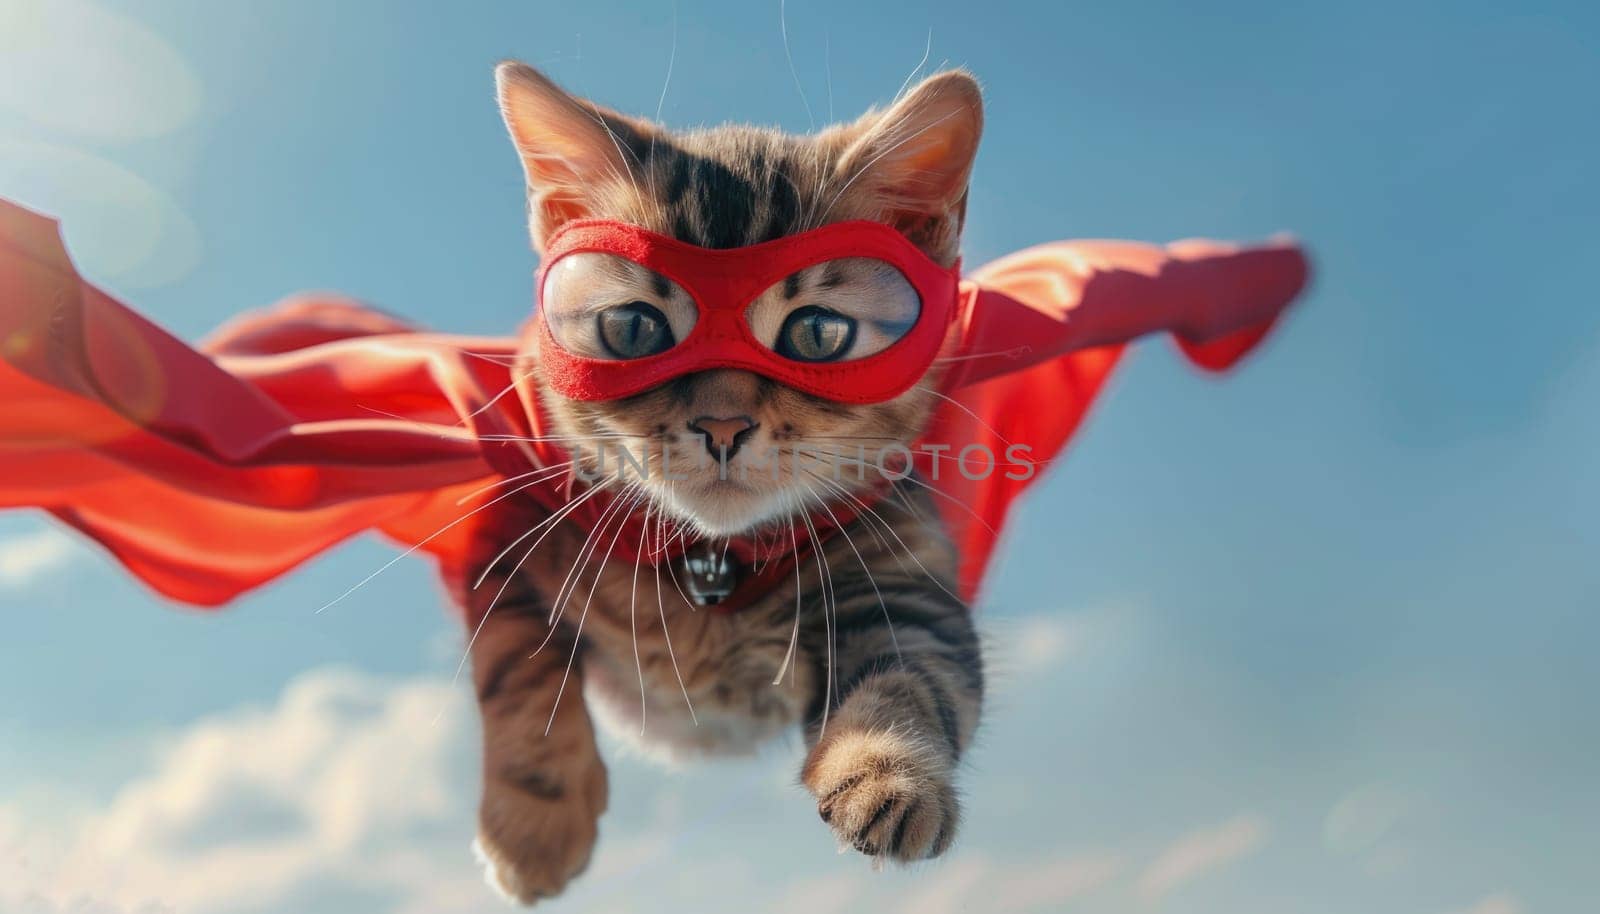 A cat wearing a red superhero costume is flying through the air by AI generated image.